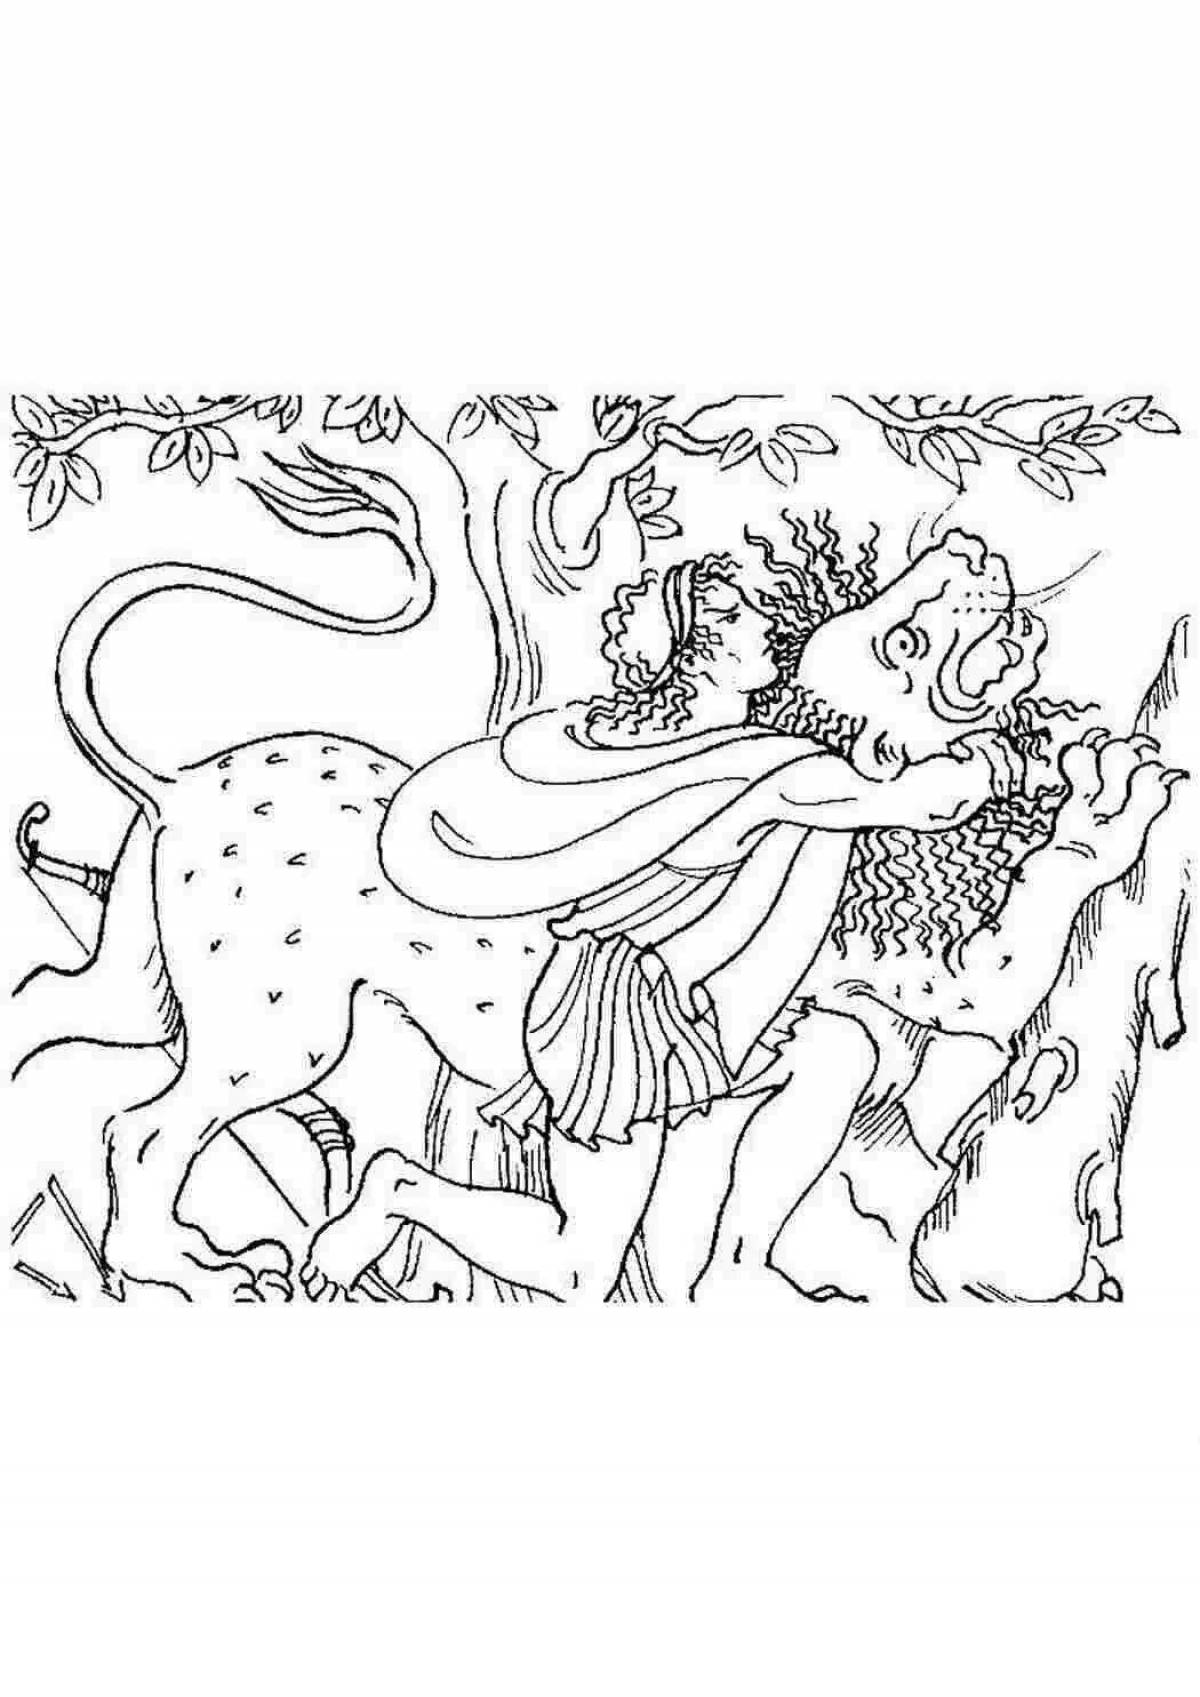 Coloring page dazzling labors of hercules